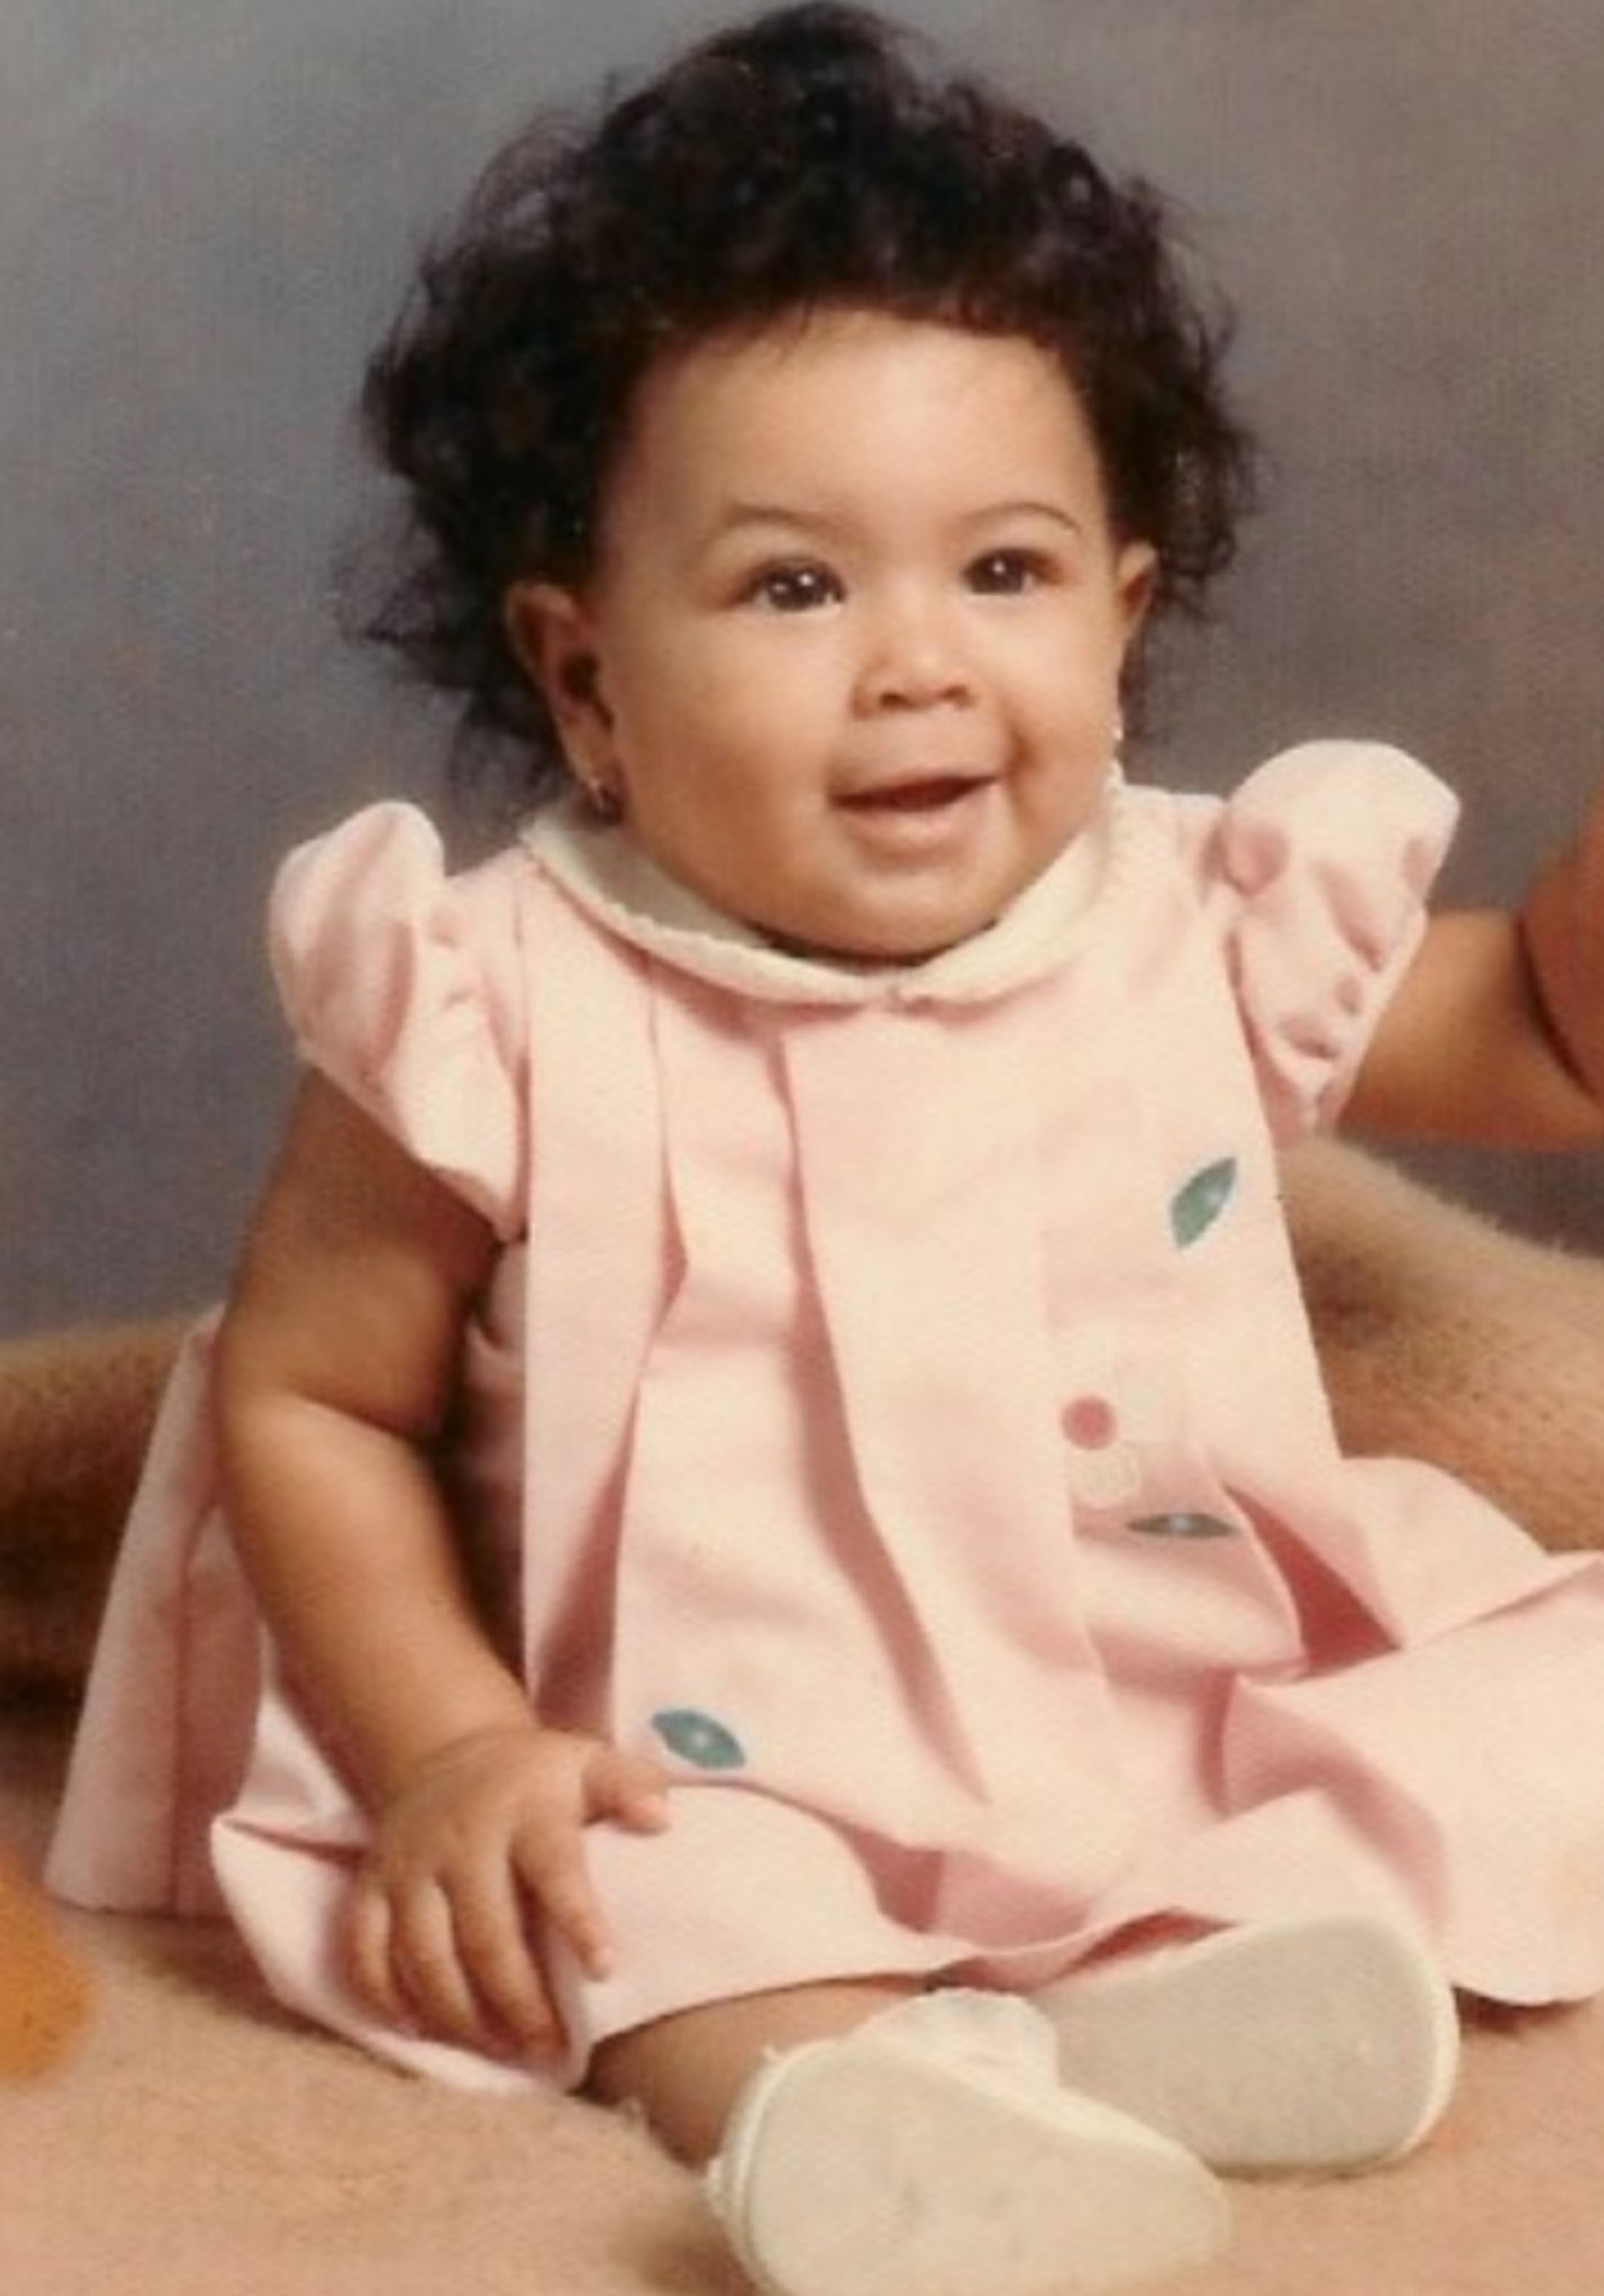 Beyonce, who was born in Houston, Texas, pictured as a baby